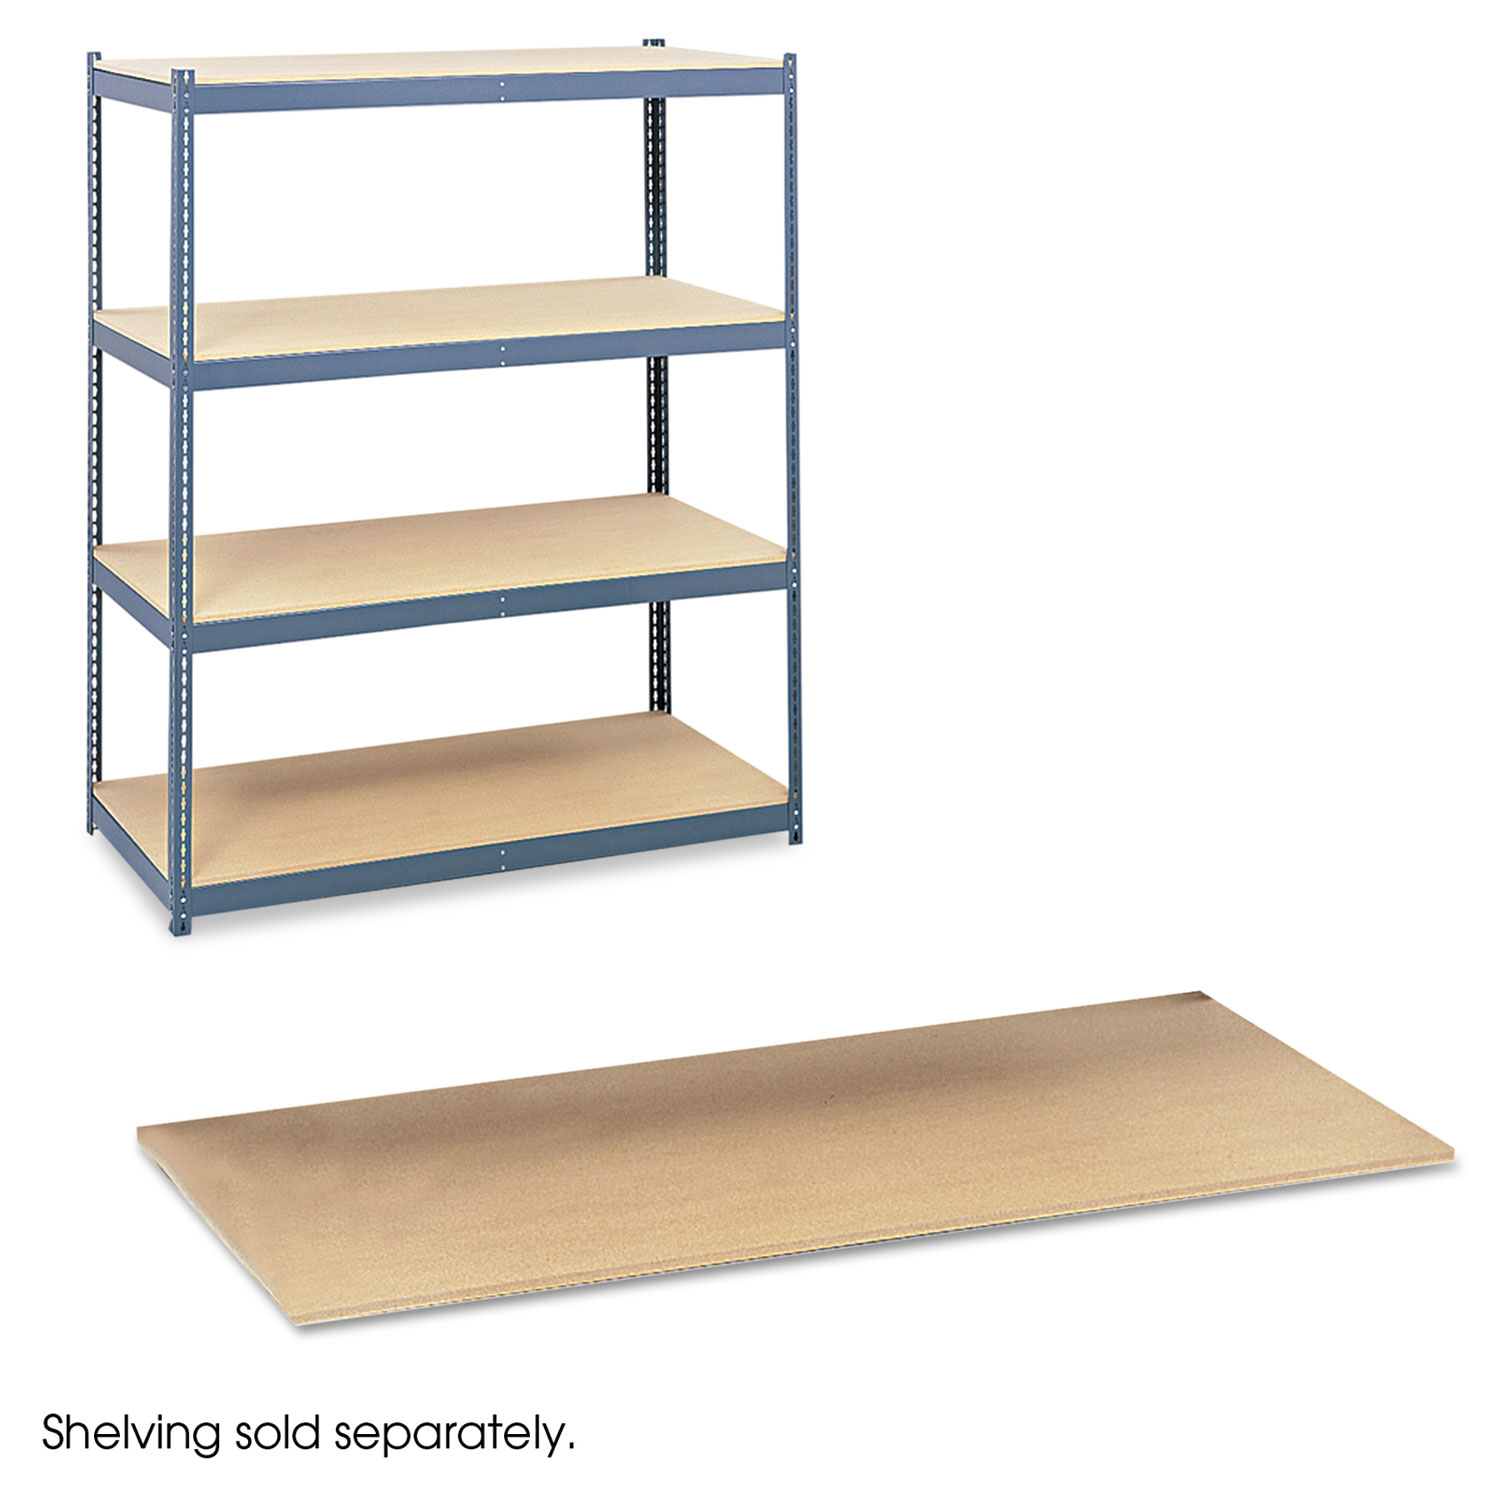  Safco 5261 Particleboard Shelves for Steel Pack Archival Shelving, 69w x 33d x 84w, Box of 4 (SAF5261) 